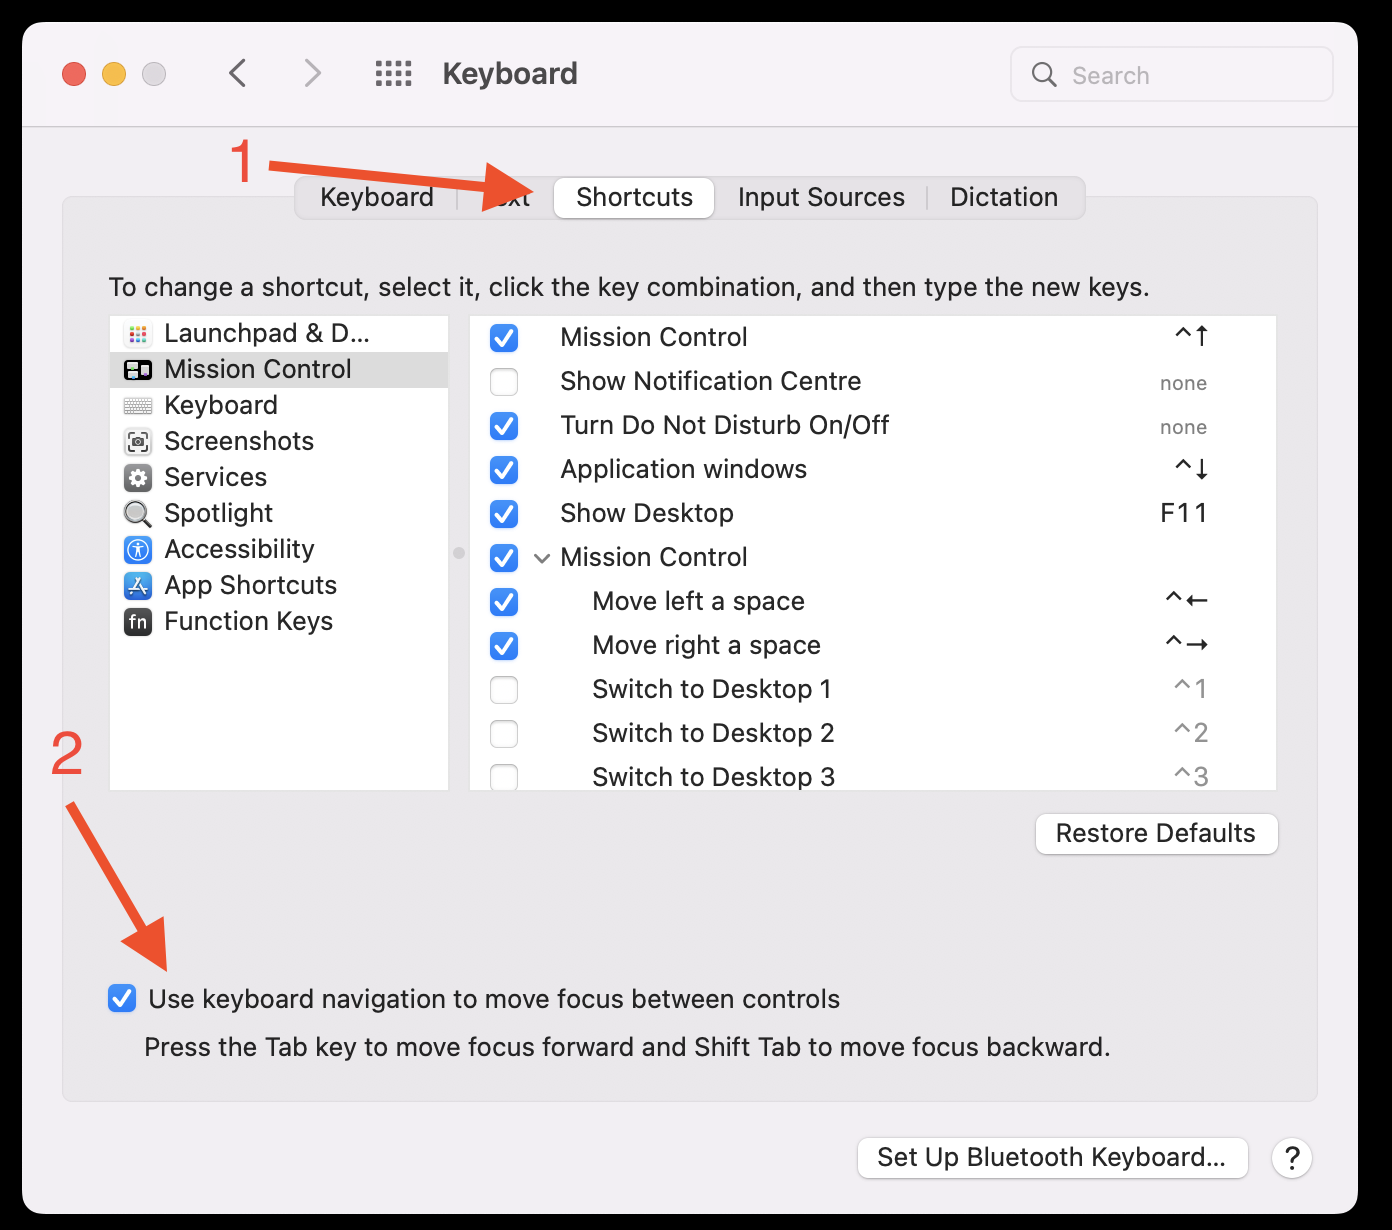 macOS 10.15+ settings open to the Keyboard section. First highlighted is the “Shortcuts” tab, and second is a checkbox at the bottom of the window reading “Use keyboard navigation to move focus between controls.